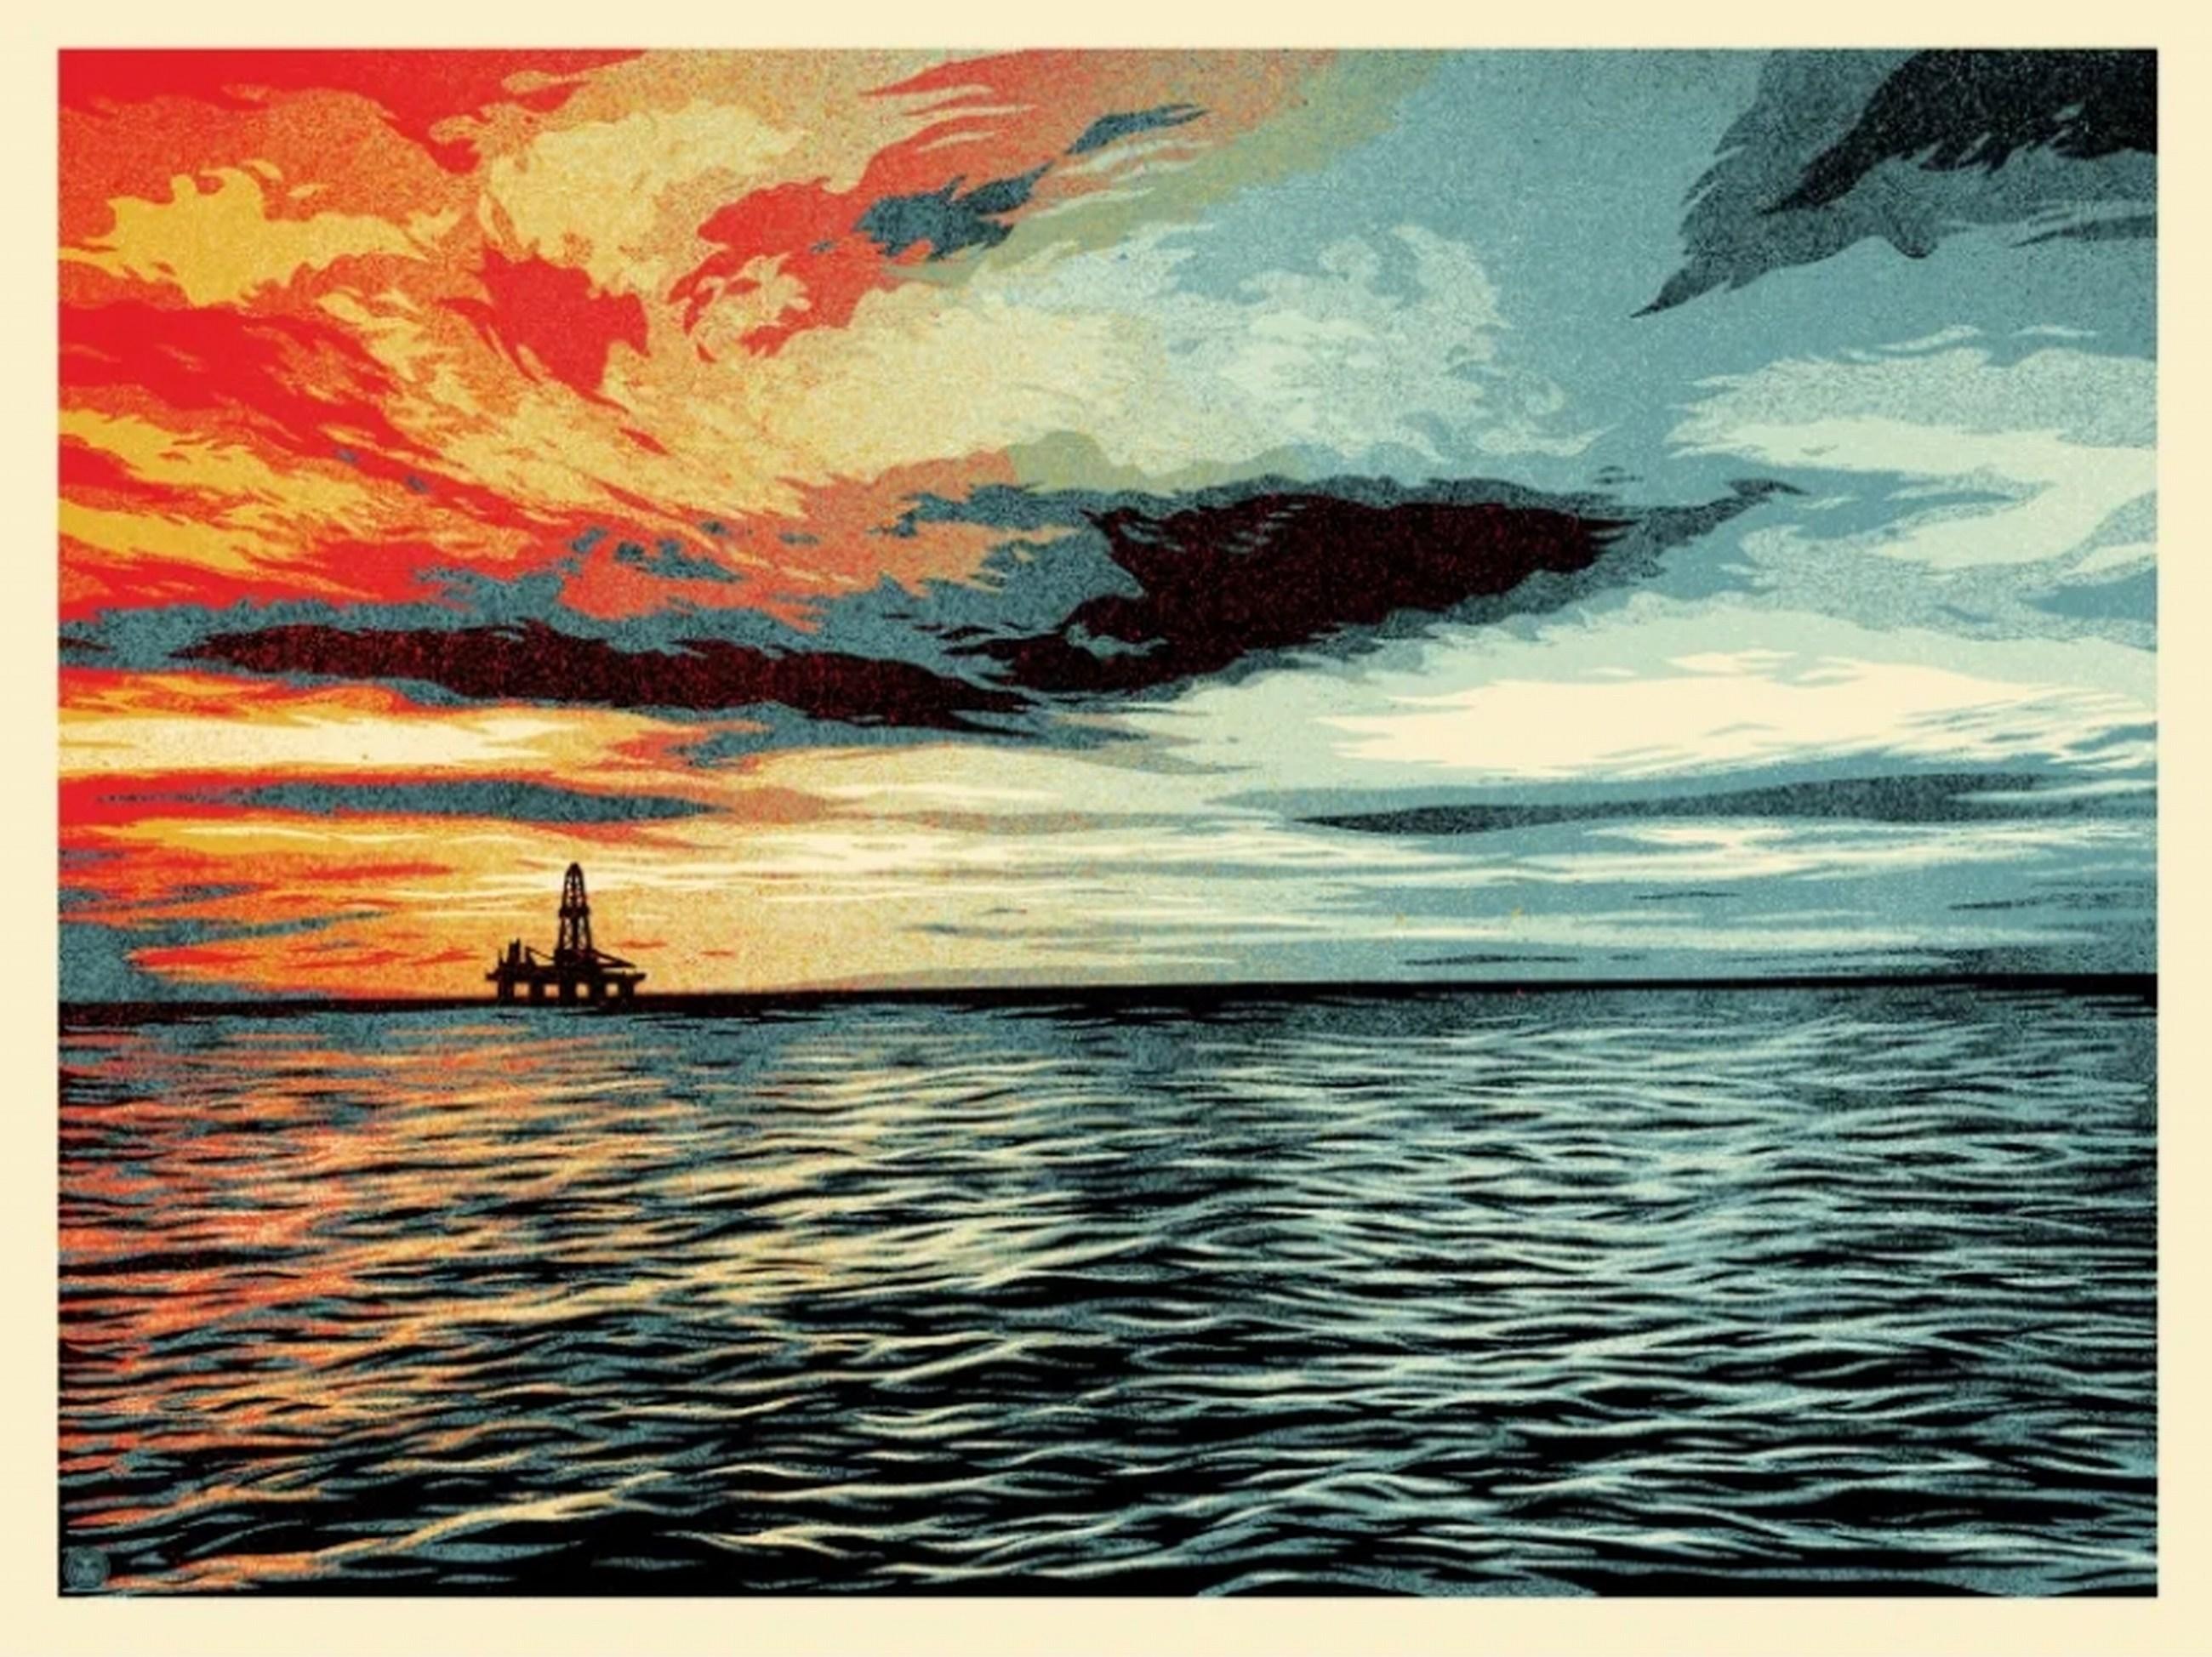 Sunset as the Fall Approaches (Oil Spill, Santa Barbara, Preserve Environment) - Print by Shepard Fairey